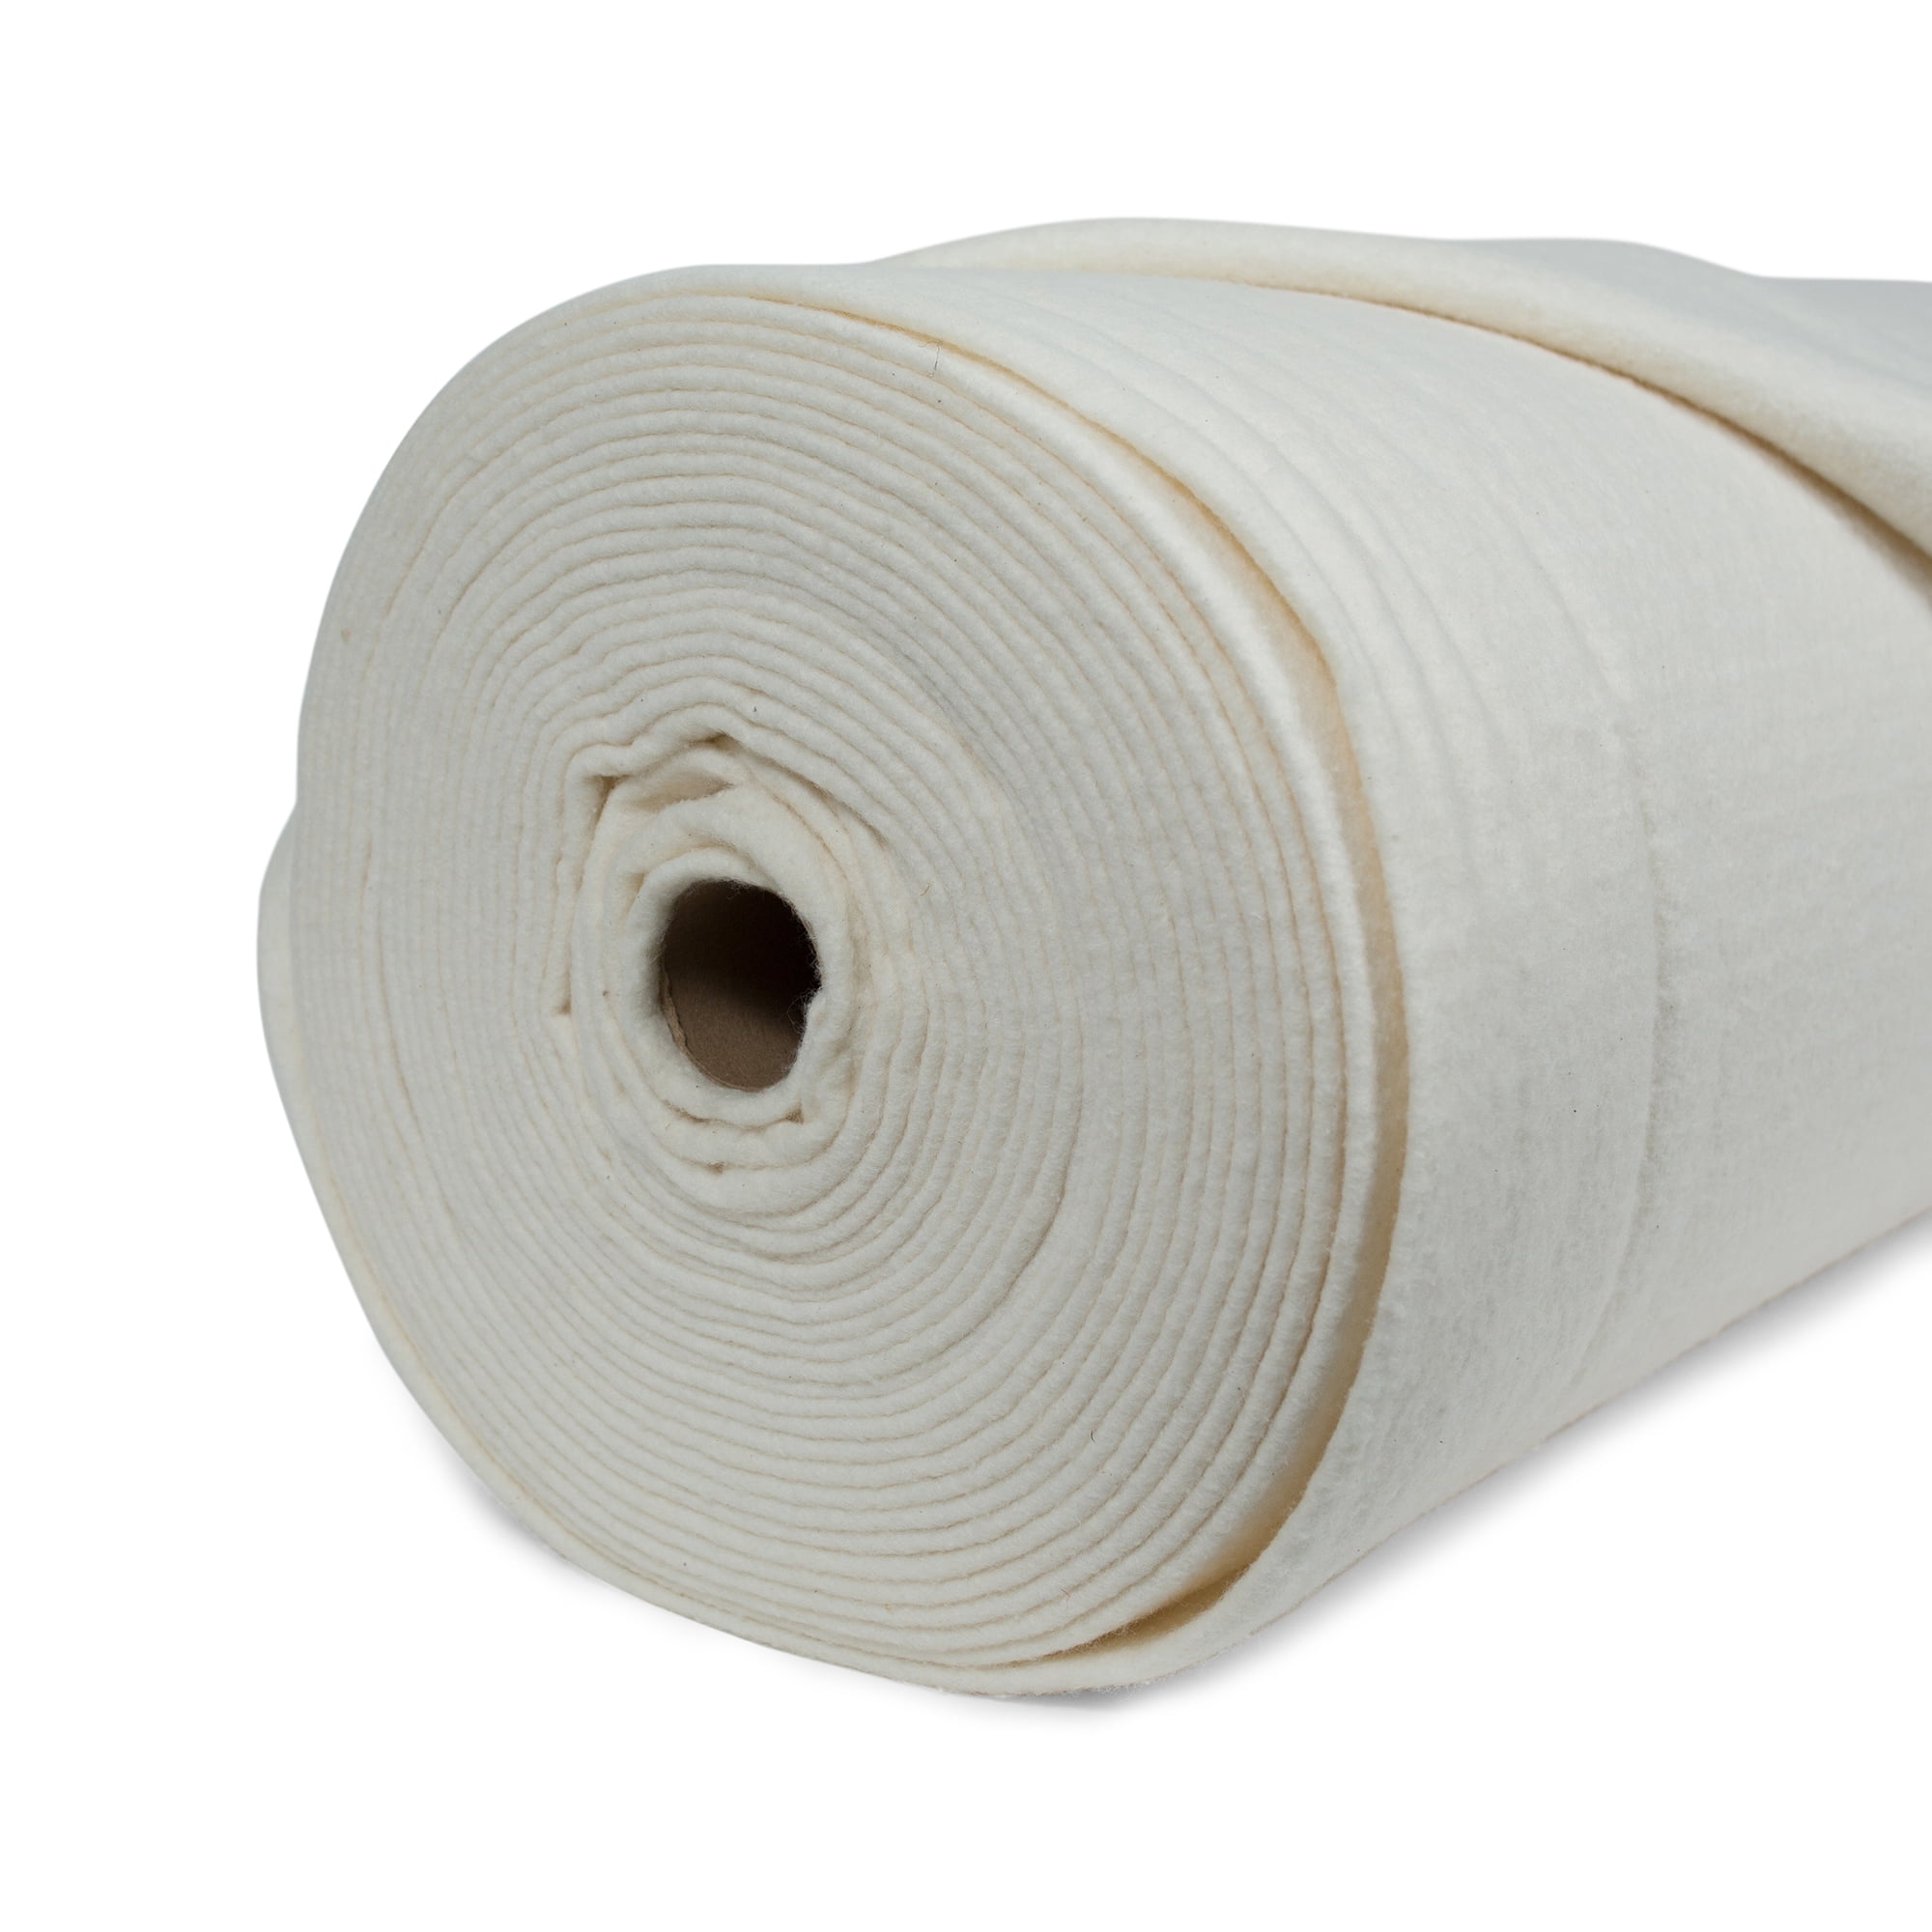 Toasty Cotton 100% Natural Cotton Batting By Fairfield™, 90 Wide